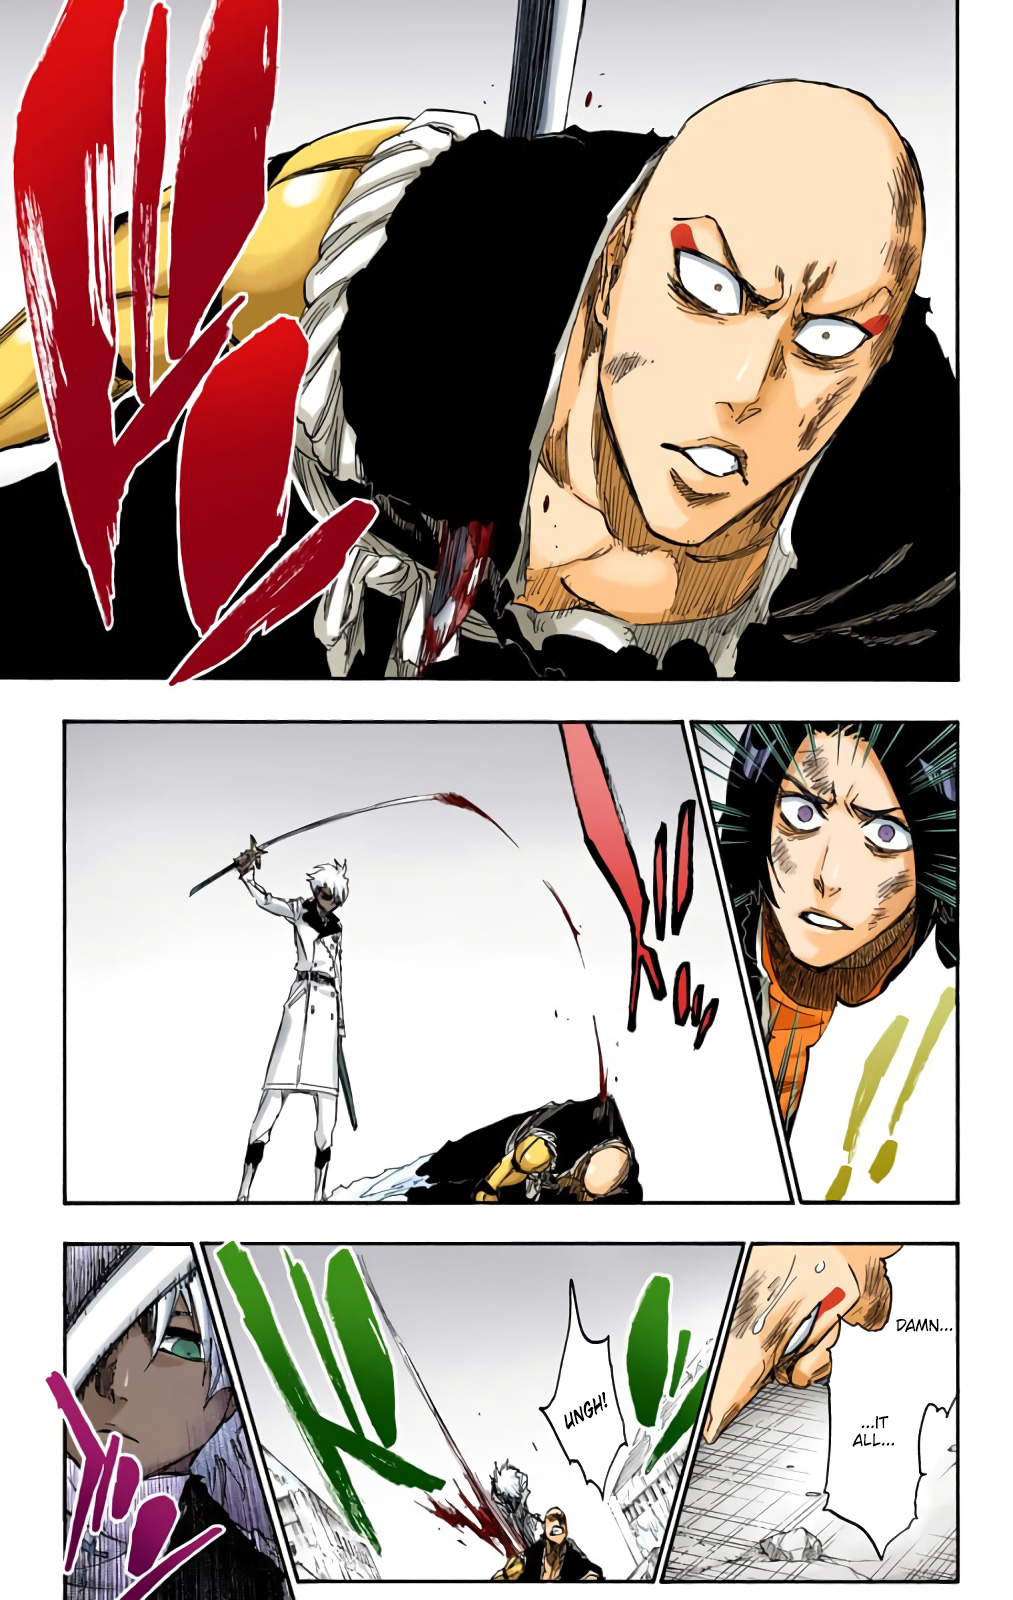 Bleach Digital Colored Comics Vol. 66 Ch. 592 Marching Out The ZOMBIES 3